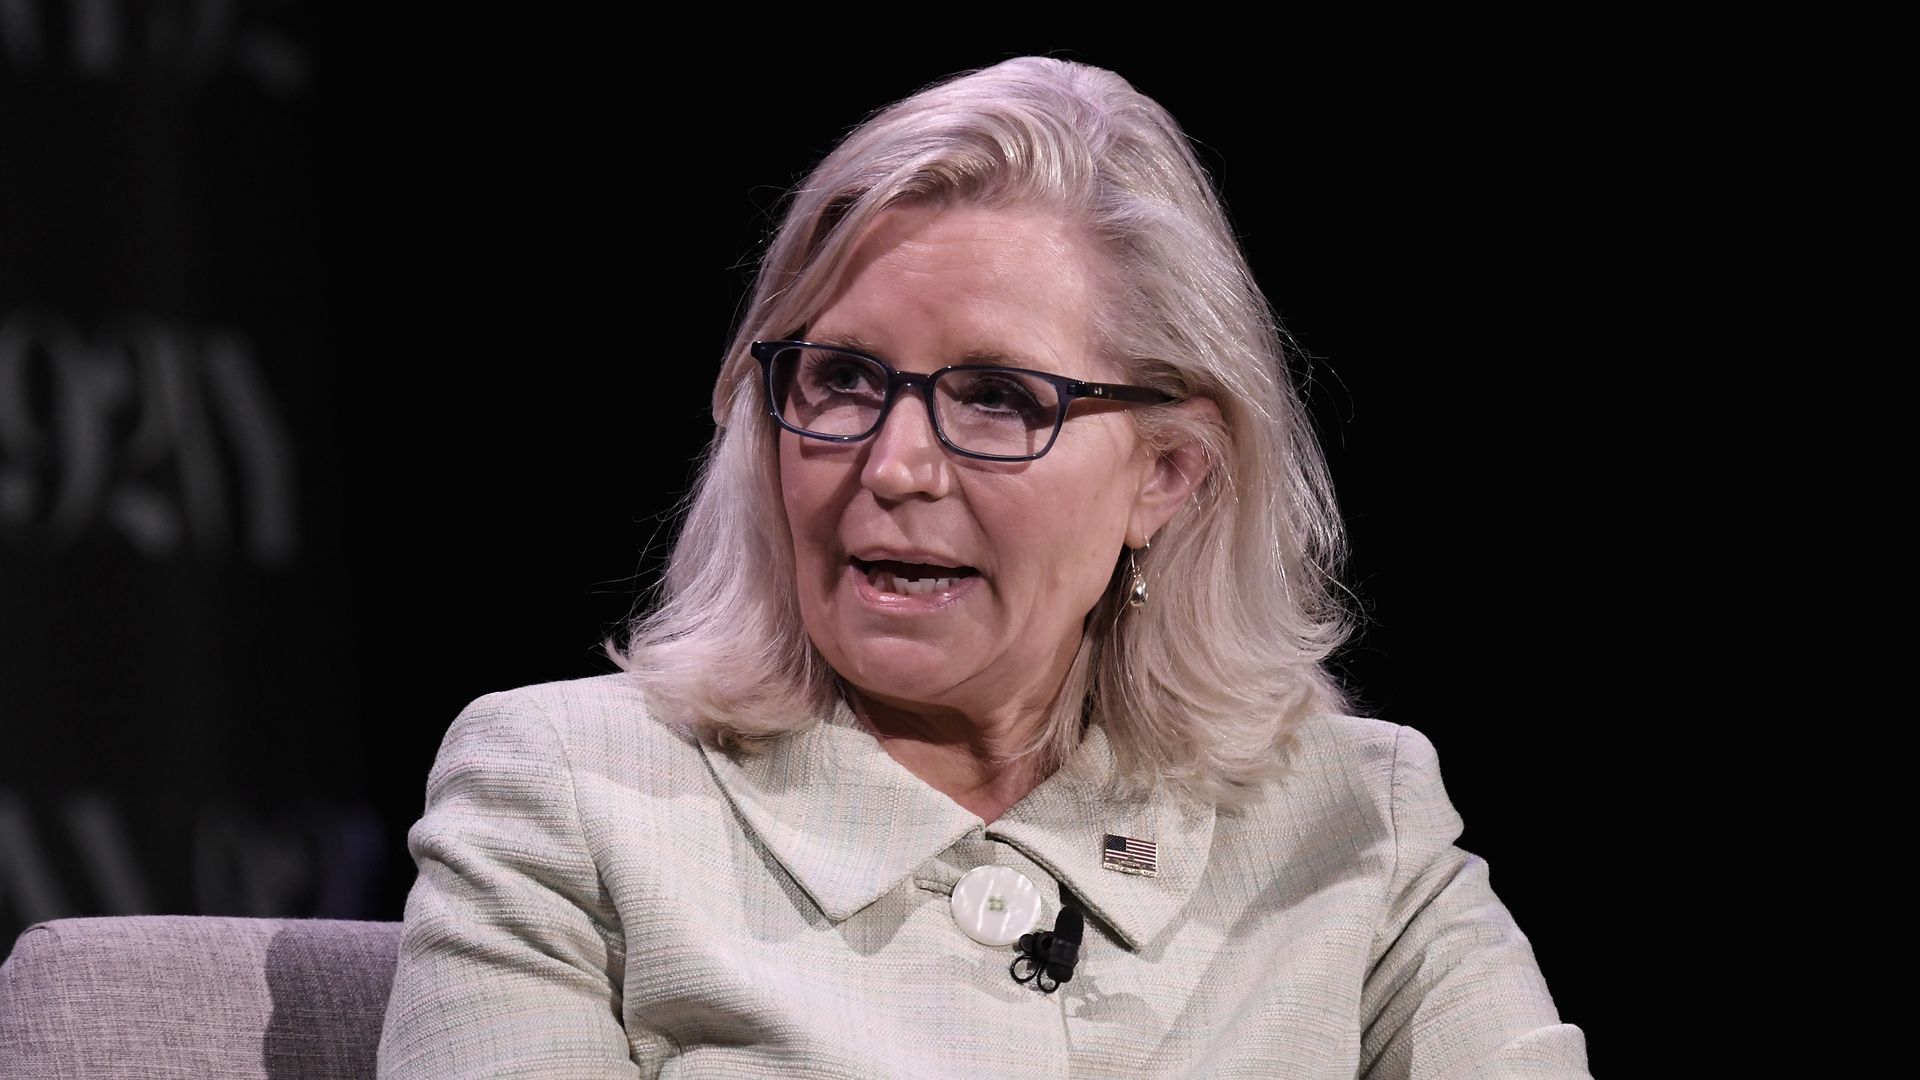 Liz Cheney speaks with an American flag pinned on her lapel and a dark background. She is seated. 